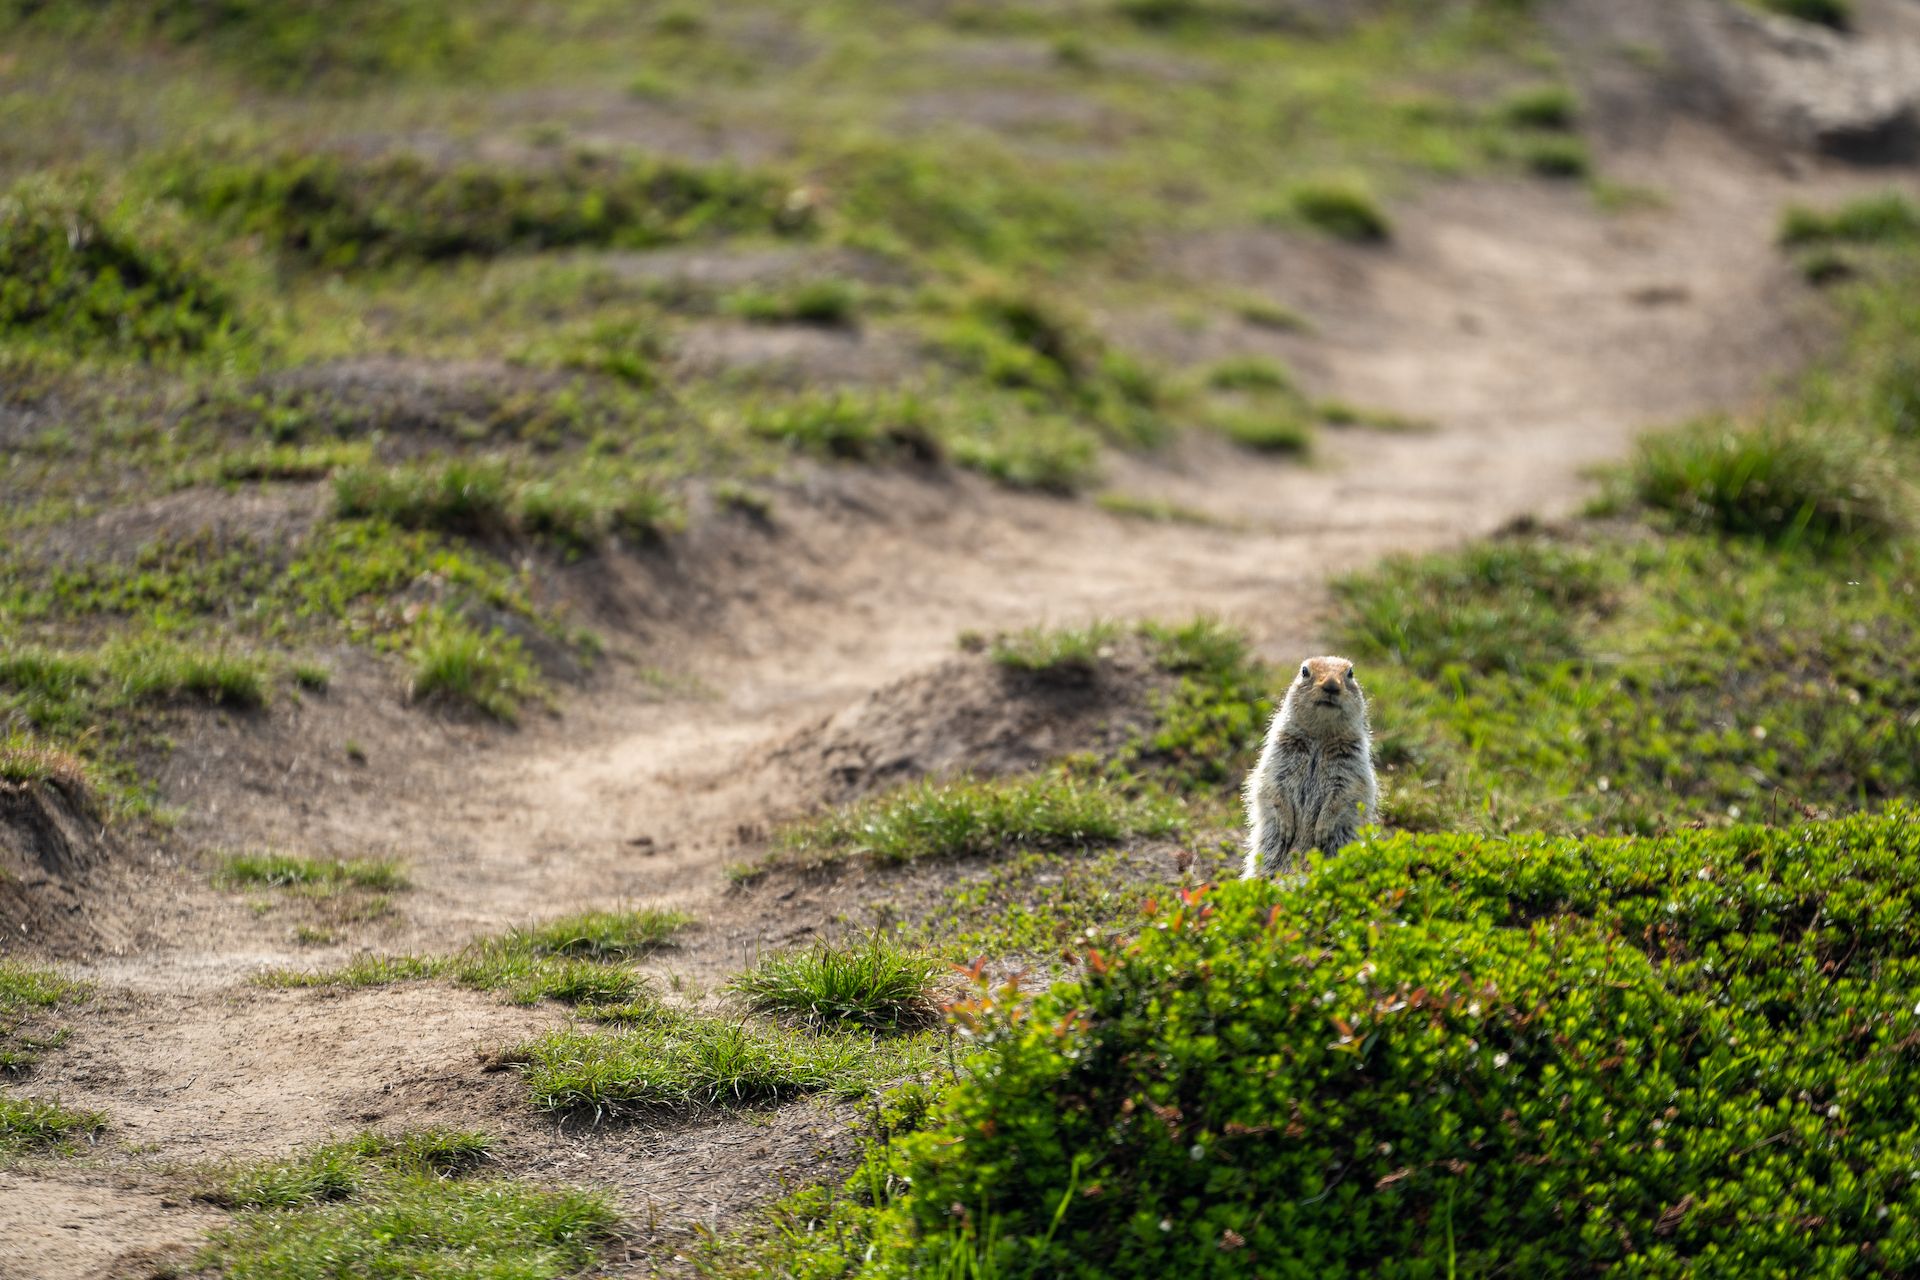 👋 We see you, ground squirrel!